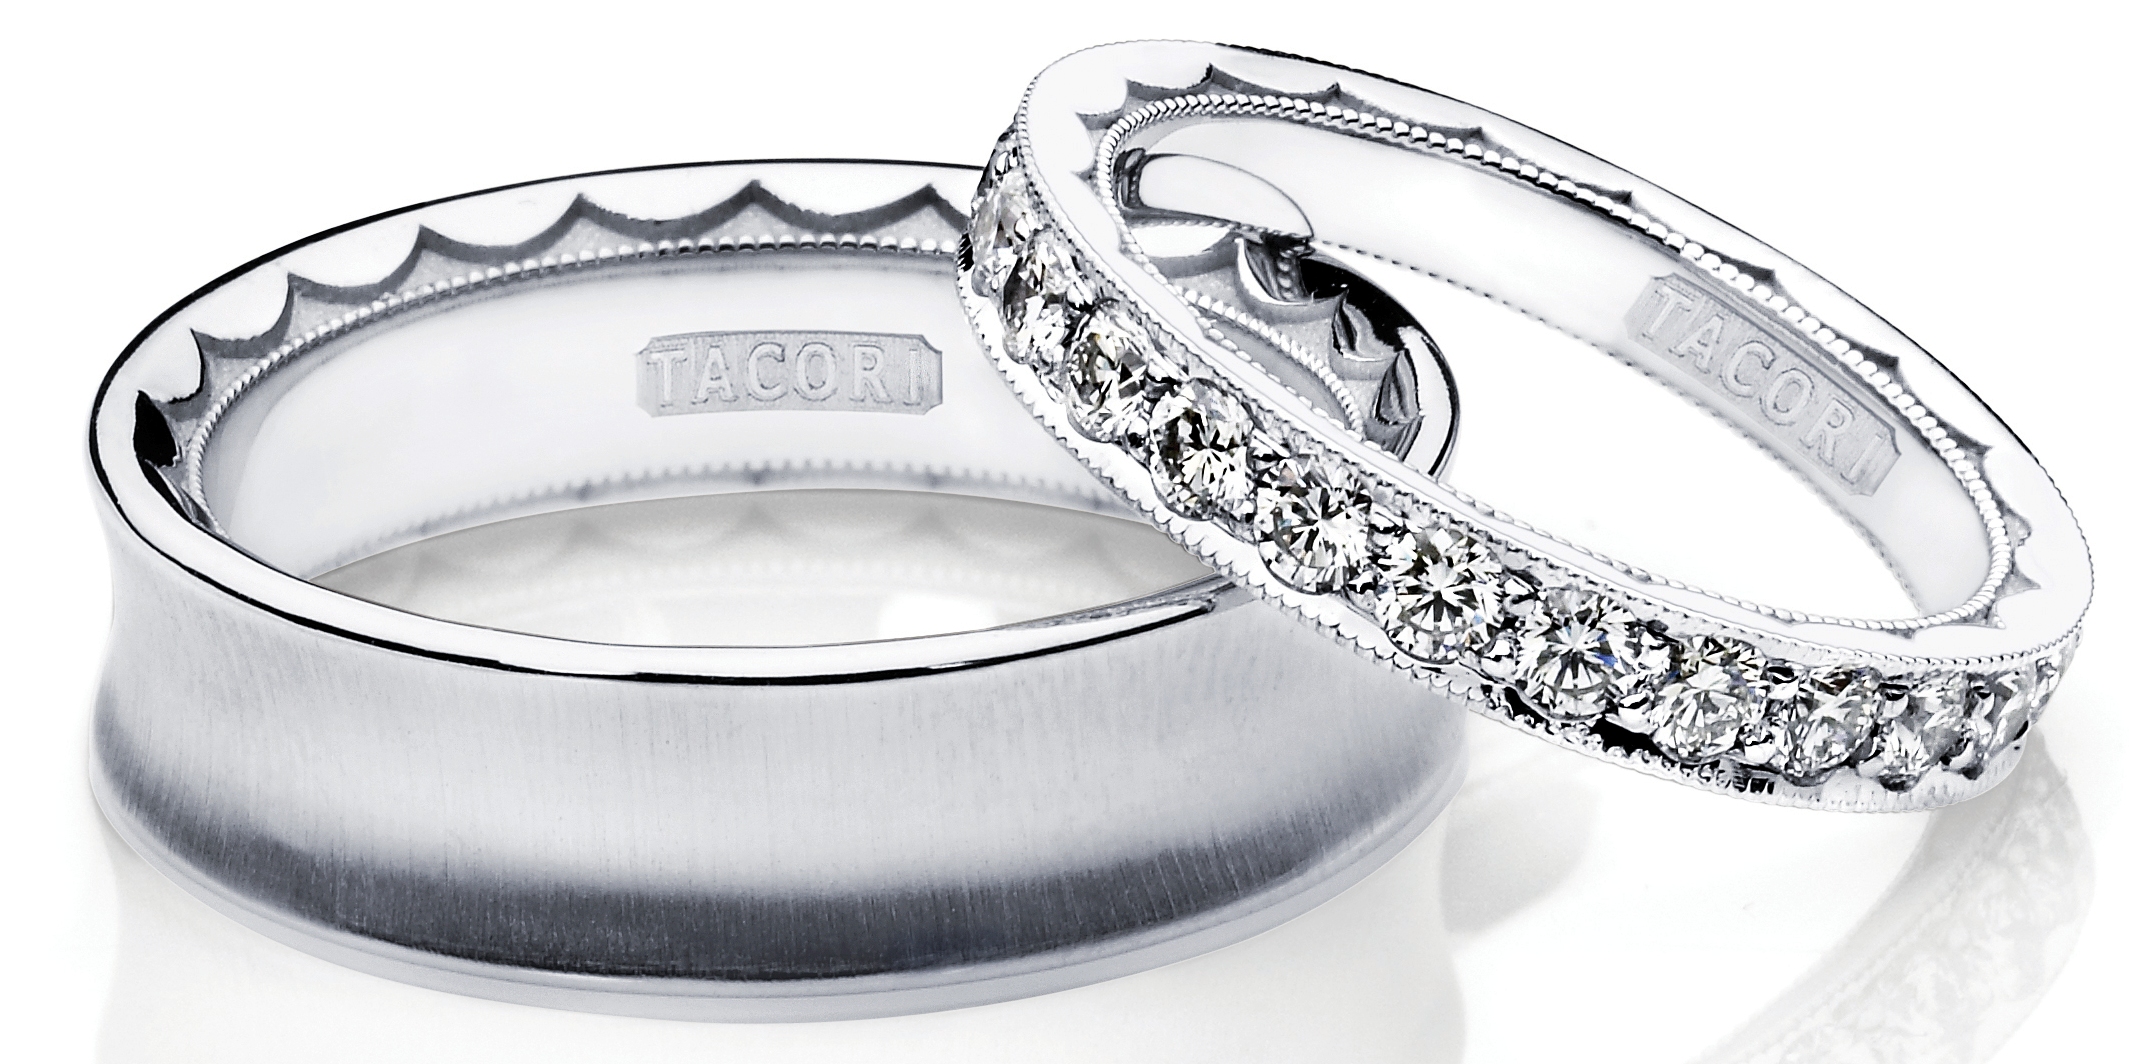 Free Wedding Rings, Download Free Clip Art, Free Clip Art on.